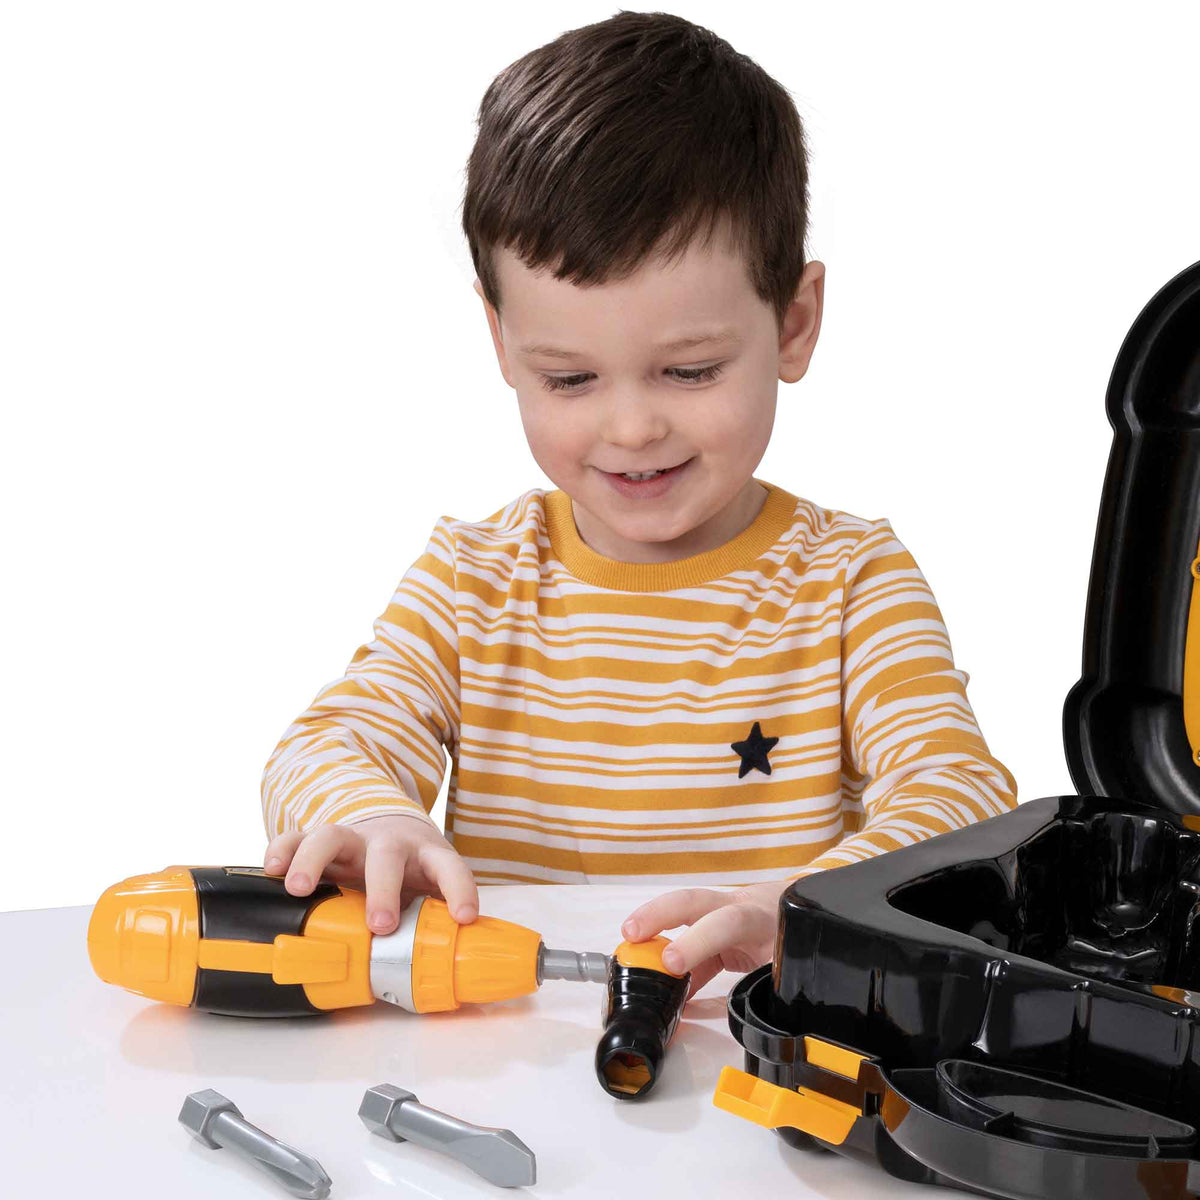 JCB Toy Drill with Case and Accessories - Battery Operated